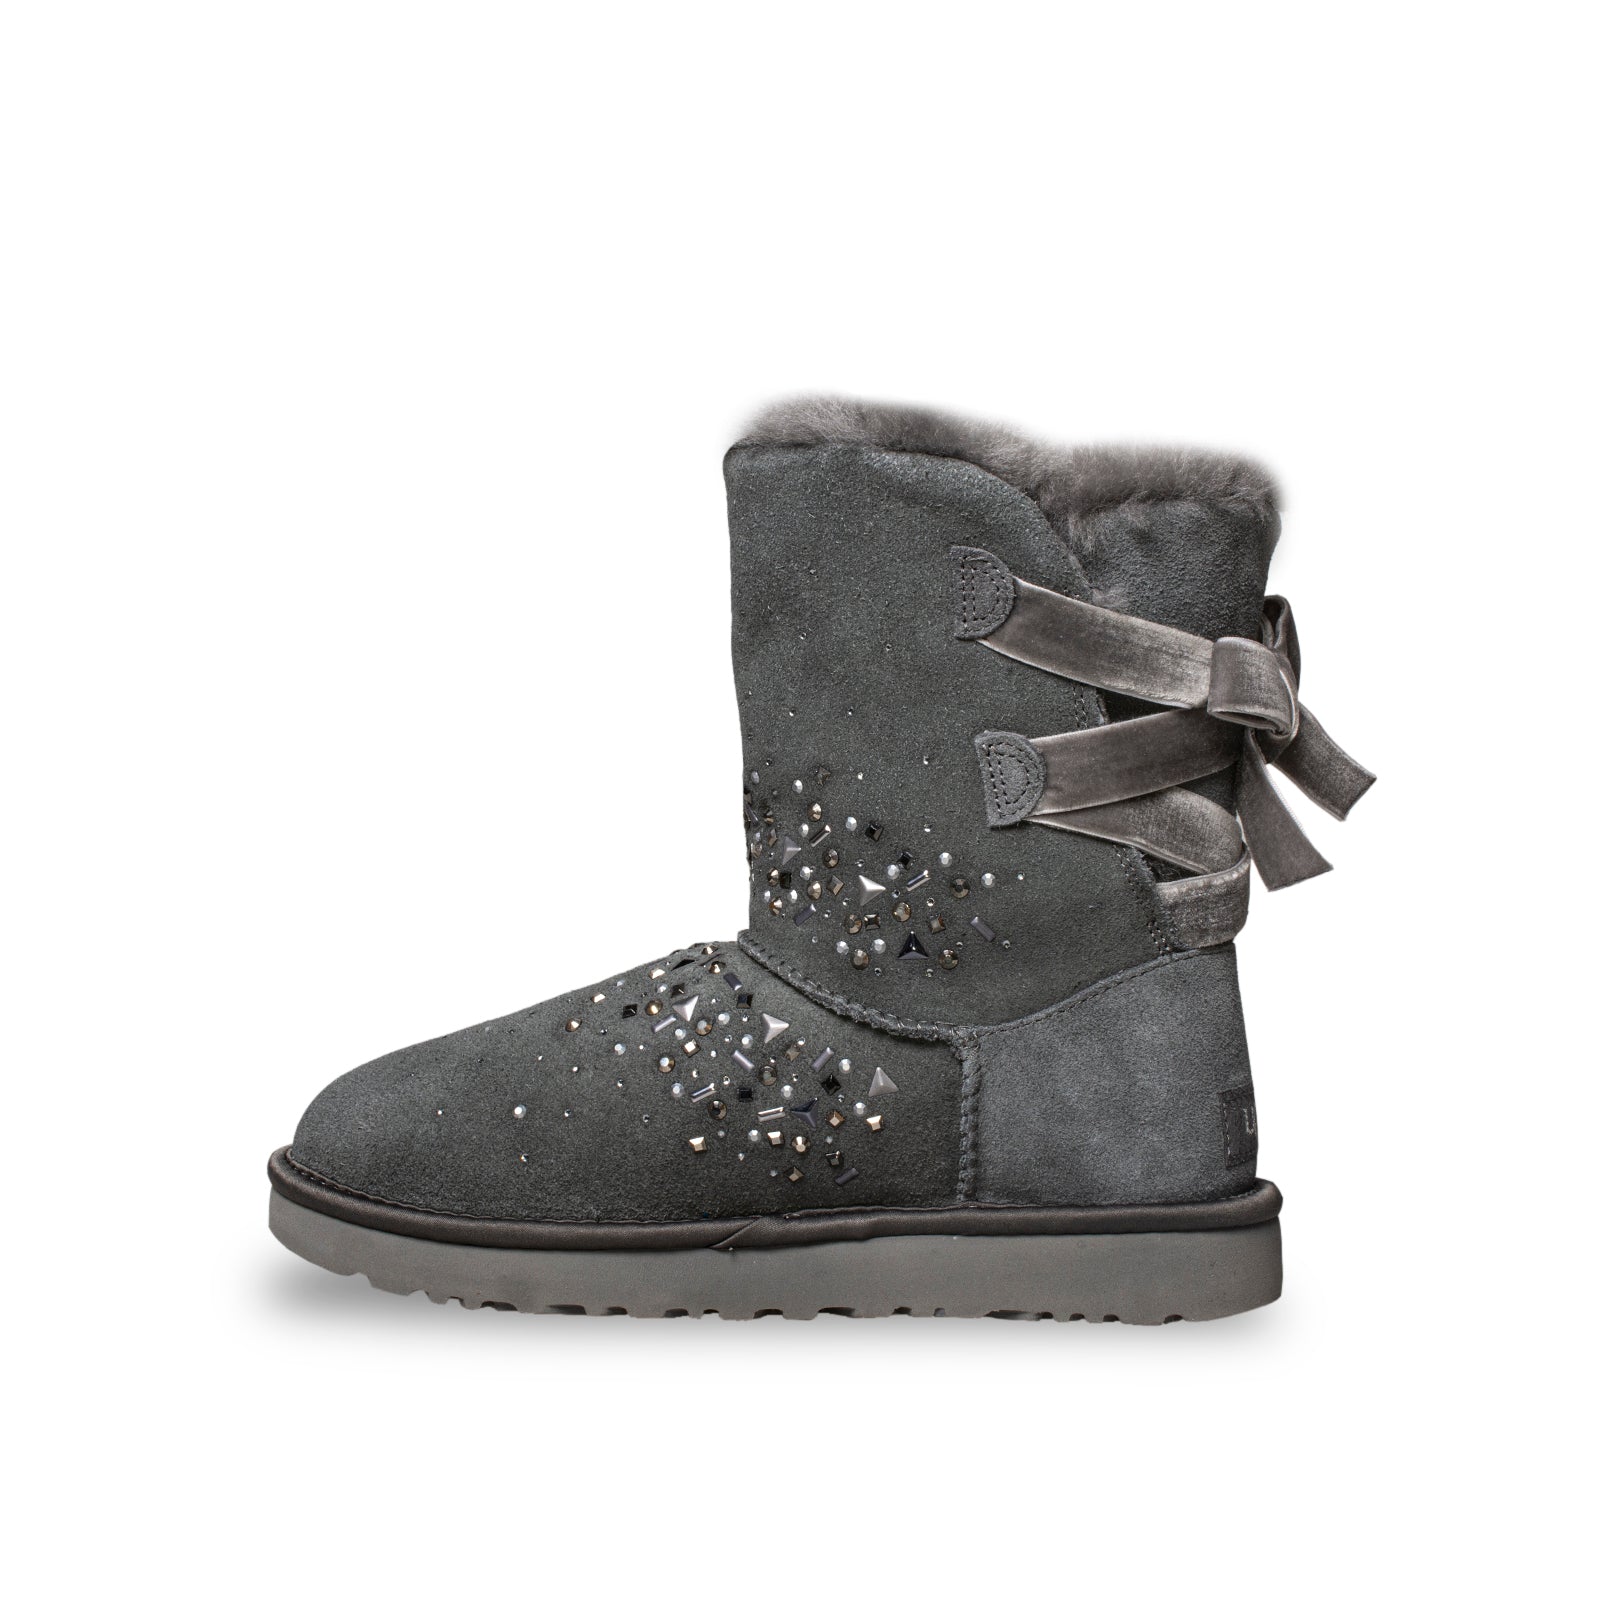 UGG Classic Galaxy Bling Short Charcoal Boots - Women's - MyCozyBoots